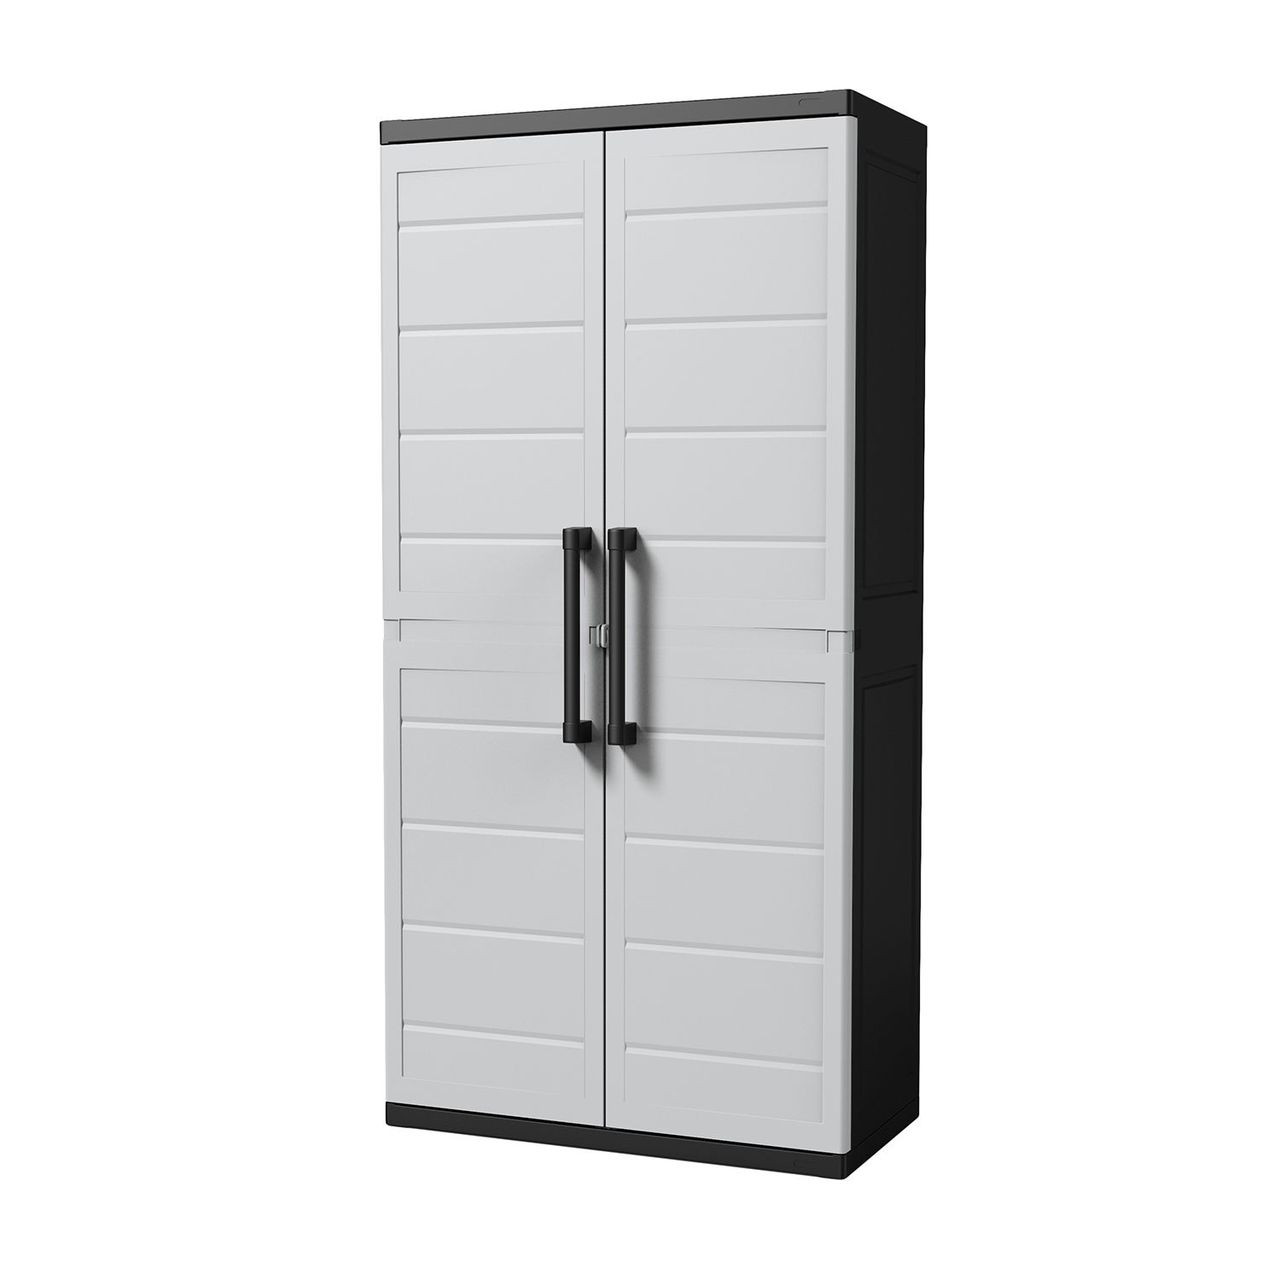 Keter Xl Plus Utility Storage Cabinet With 4 Shelves The Open